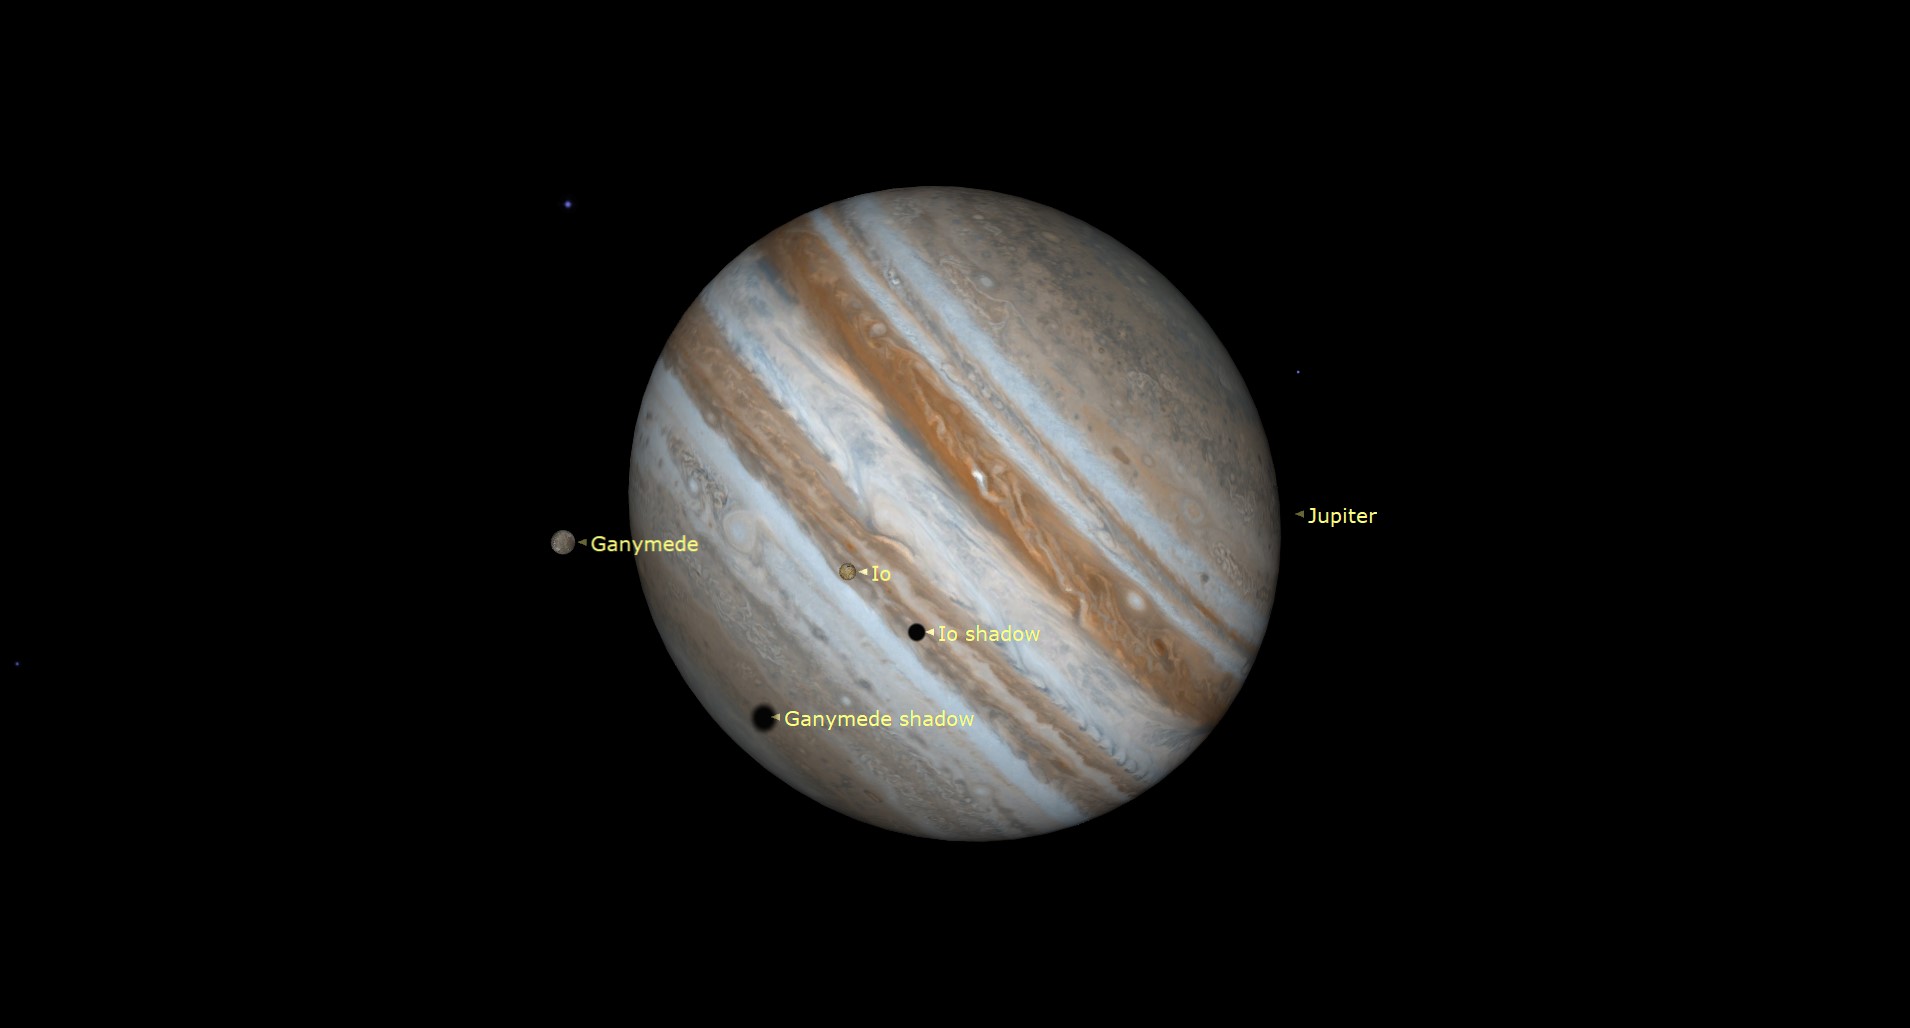 jupiter with several moons labeled